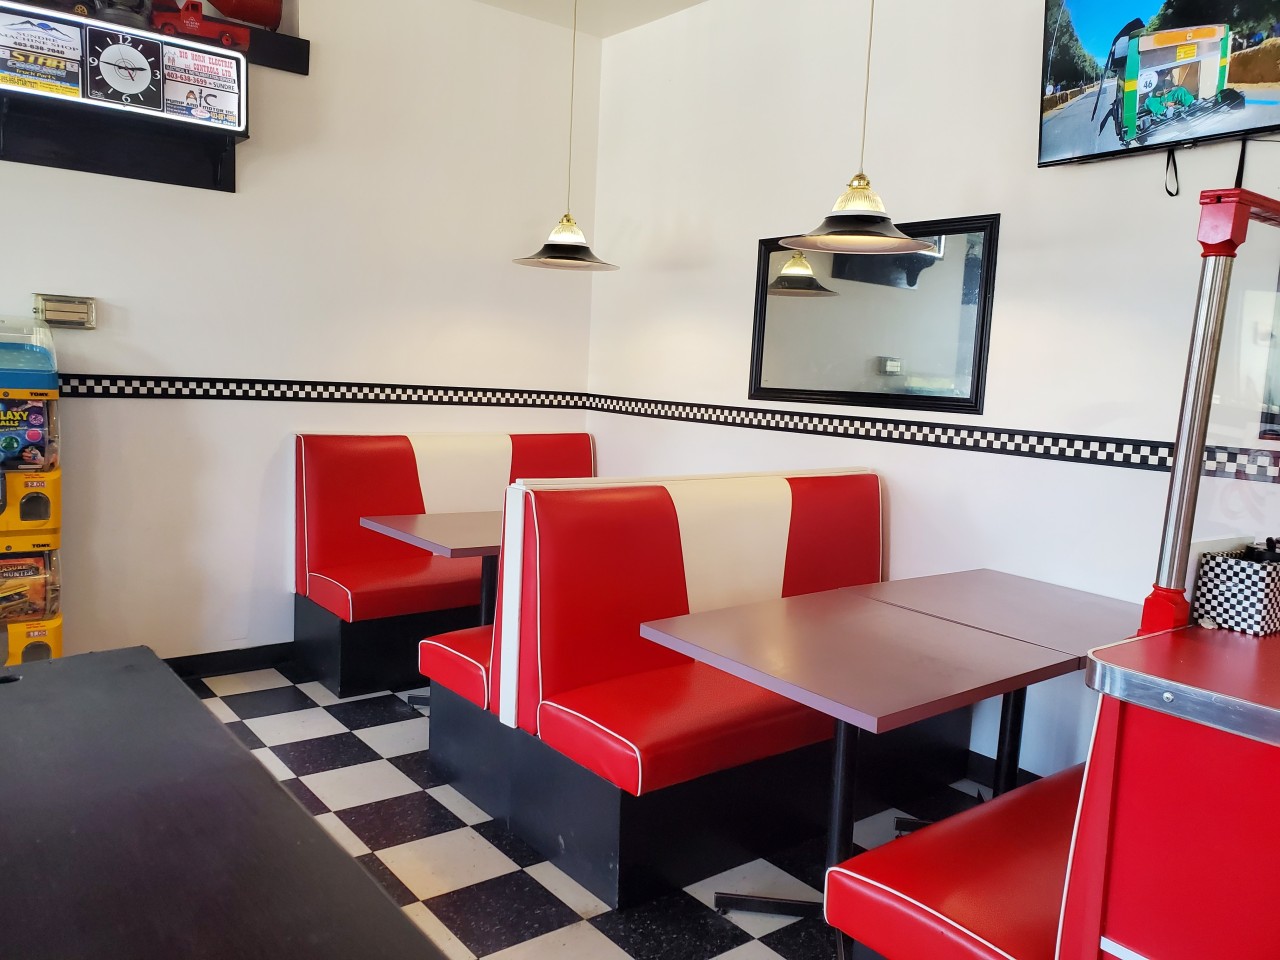 Booth Seating Available Burger Baron  - There are multiple seating options available at this Sundre diner. Pop up into one of these cute booths for an ice cream or a delicious burger 